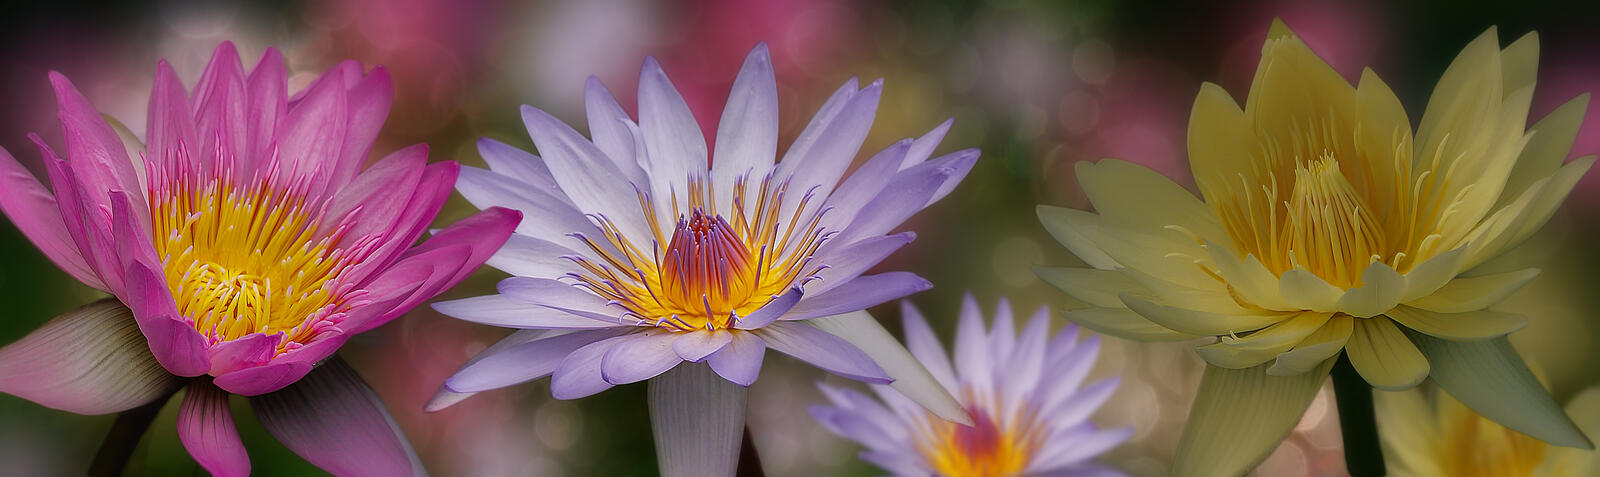 Wallpapers water Lily flowers floral arrangement on the desktop